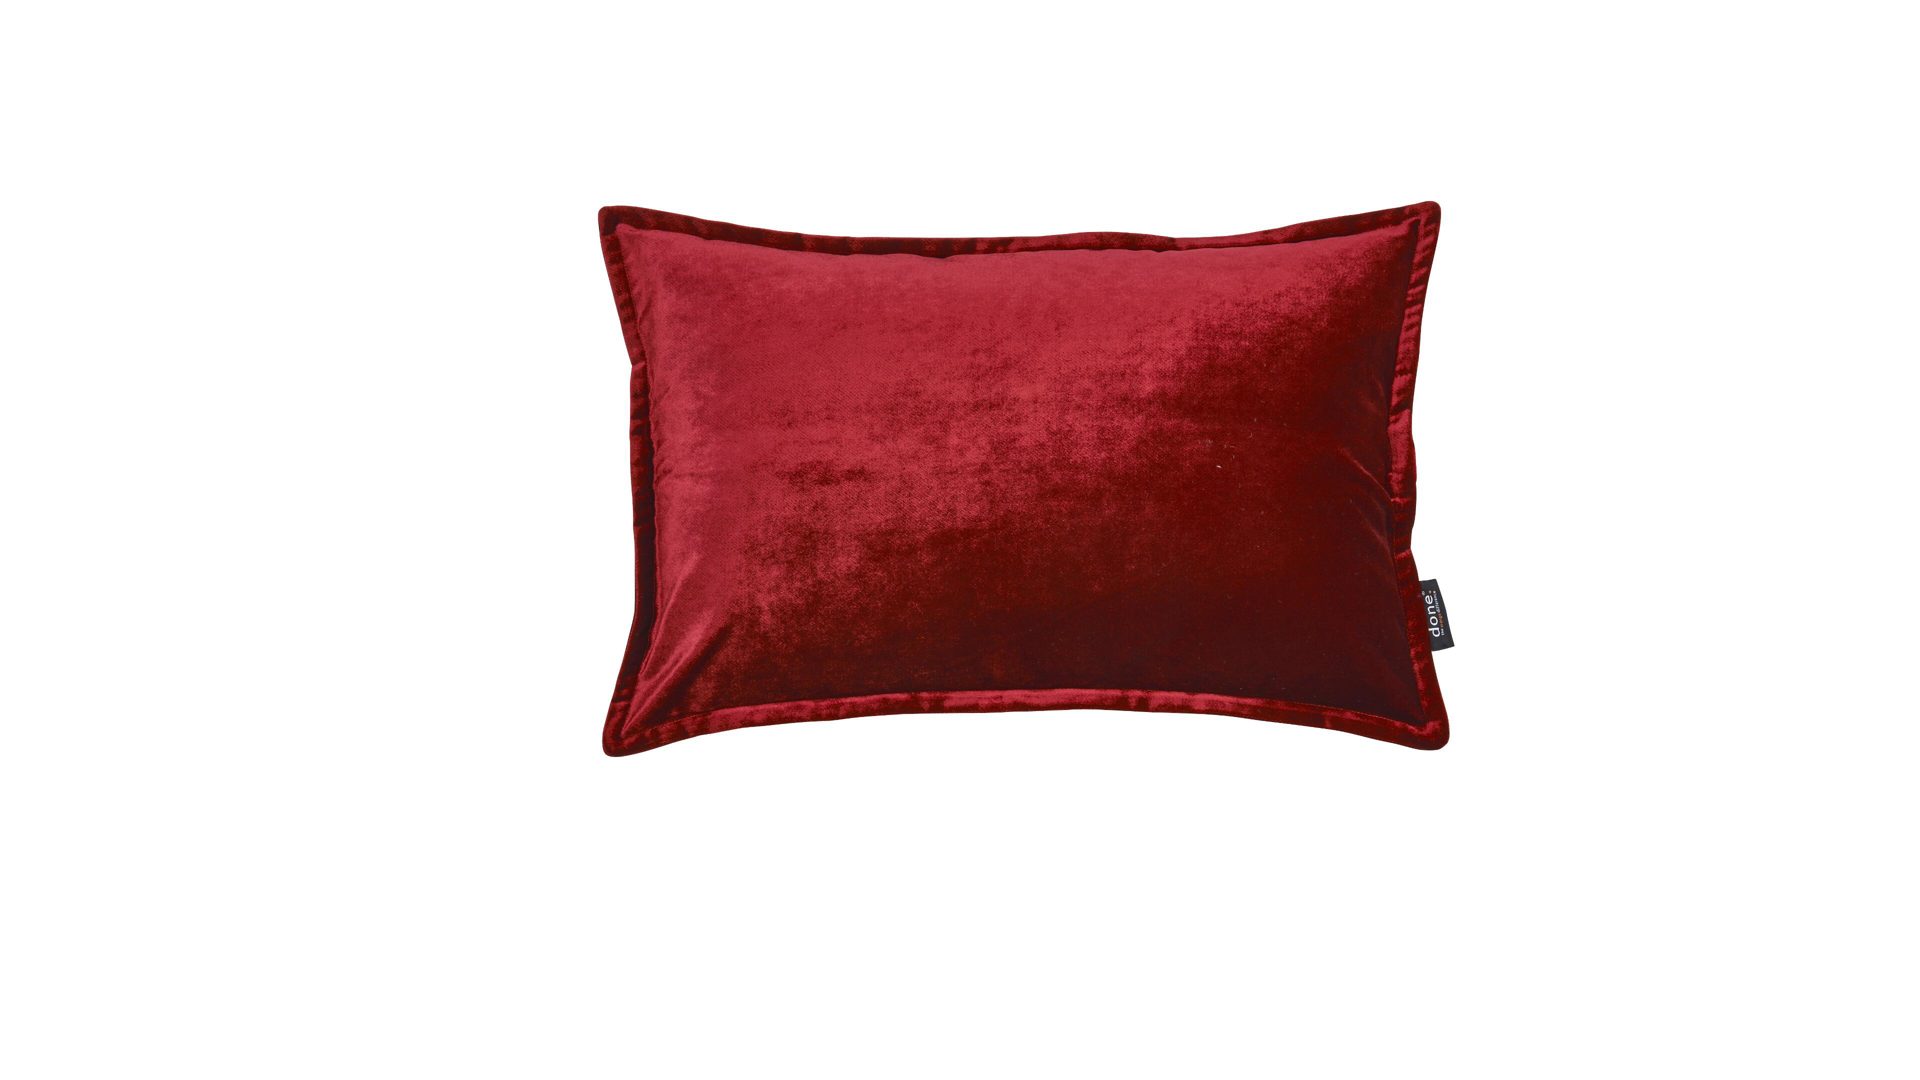 Kissenbezug /-hülle Done® by karabel home company aus Stoff in Dunkelrot DONE® Kissenhülle Cushion Glam roter Samt – ca. 40 x 60 cm